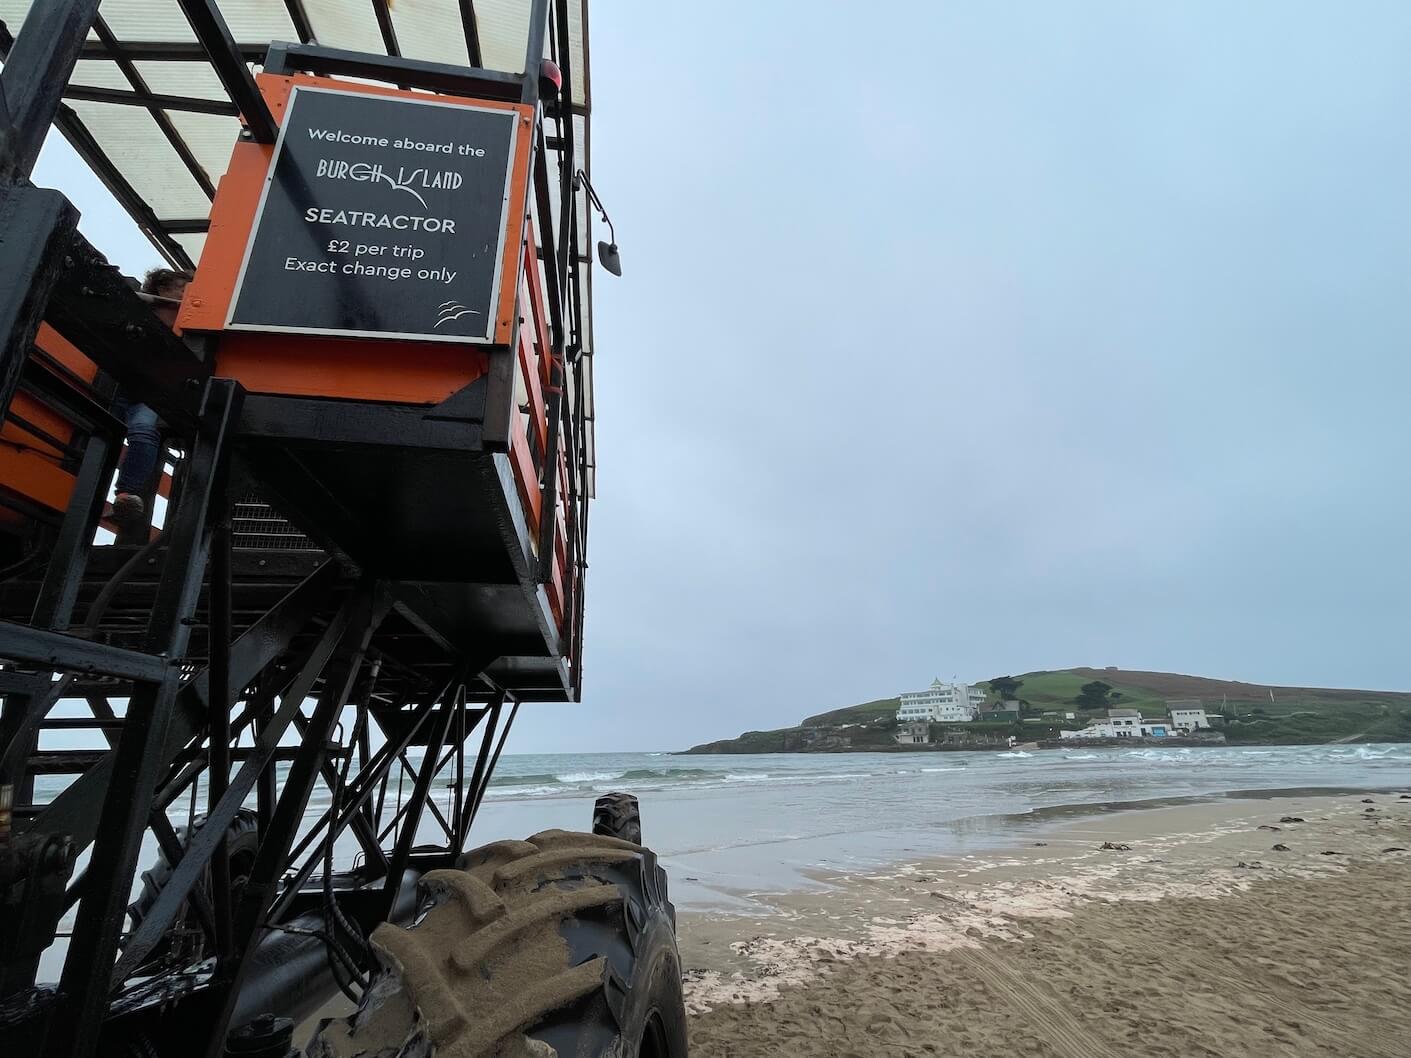 Burgh Island sea tractor with Burgh Island Hotel in the background